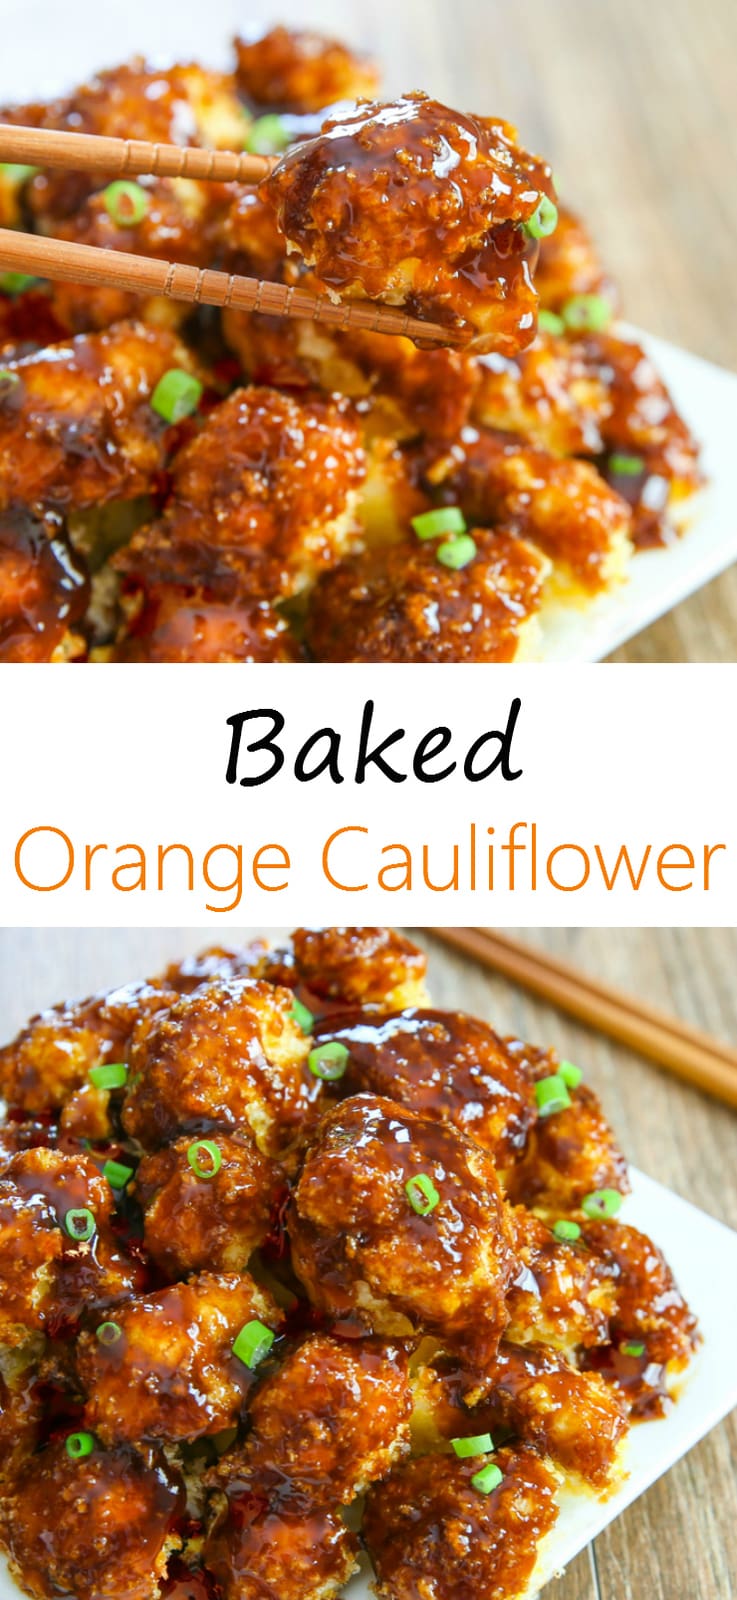 Baked Orange Cauliflower. A healthier dinner version of the Chinese take-out dish!